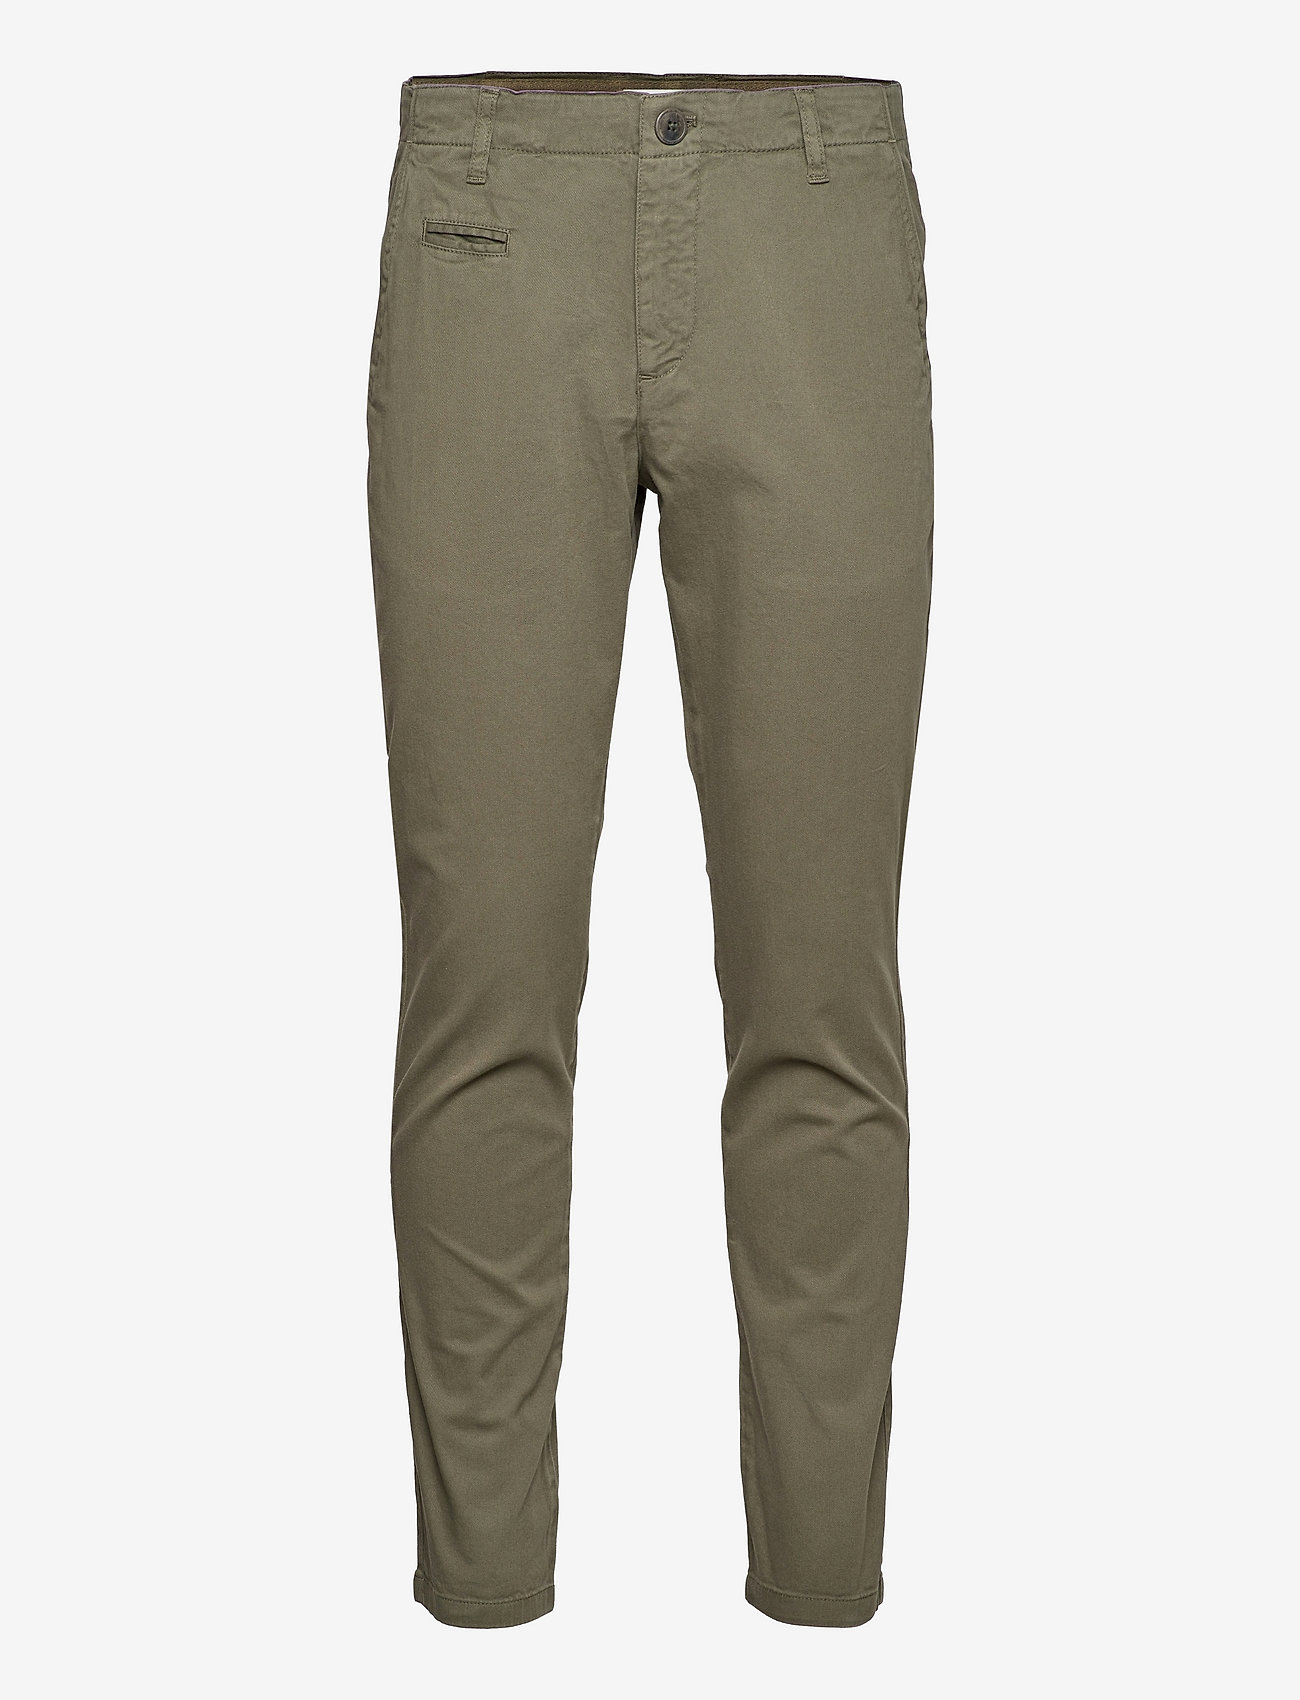 Knowledge Cotton Apparel - JOE slim stretched chino pant - GOT - chinos - forrest night - 0